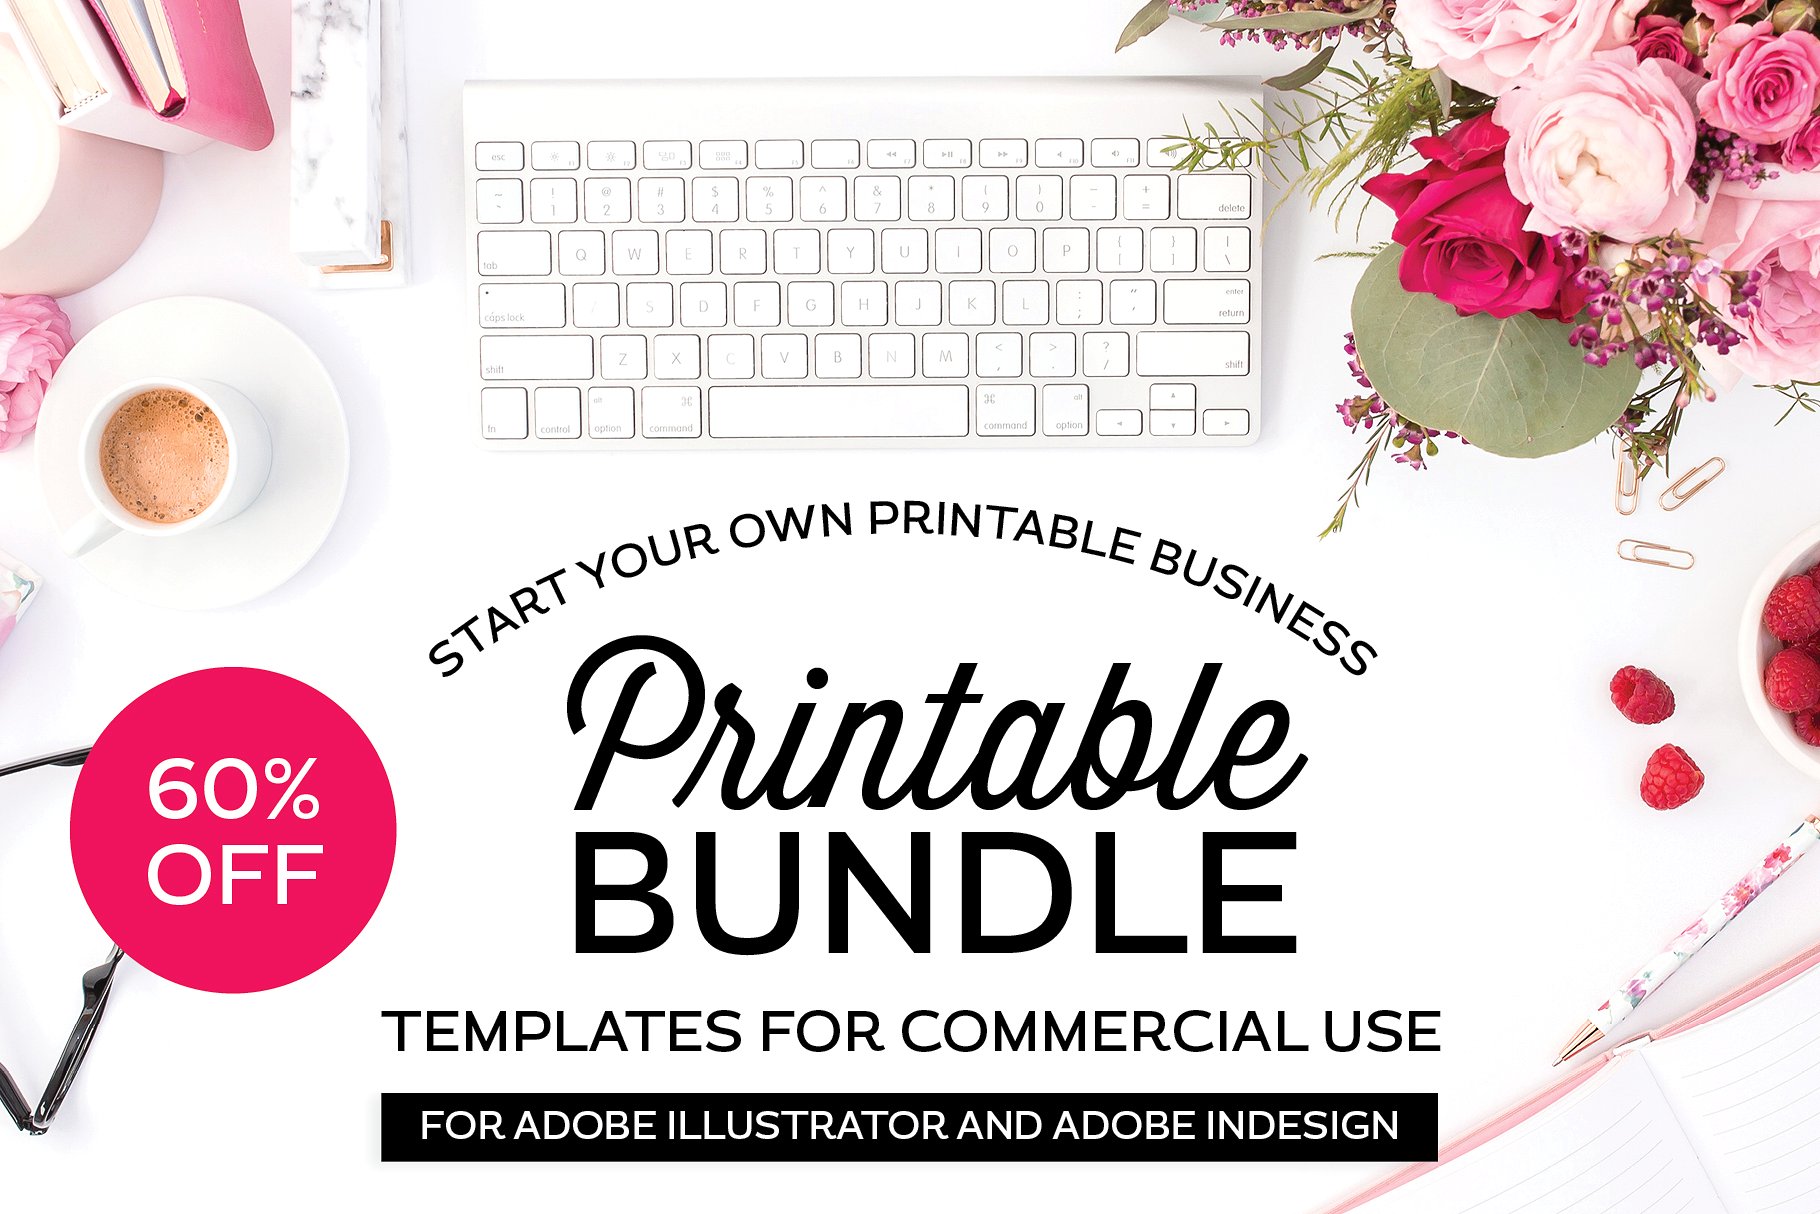 start your own printable business